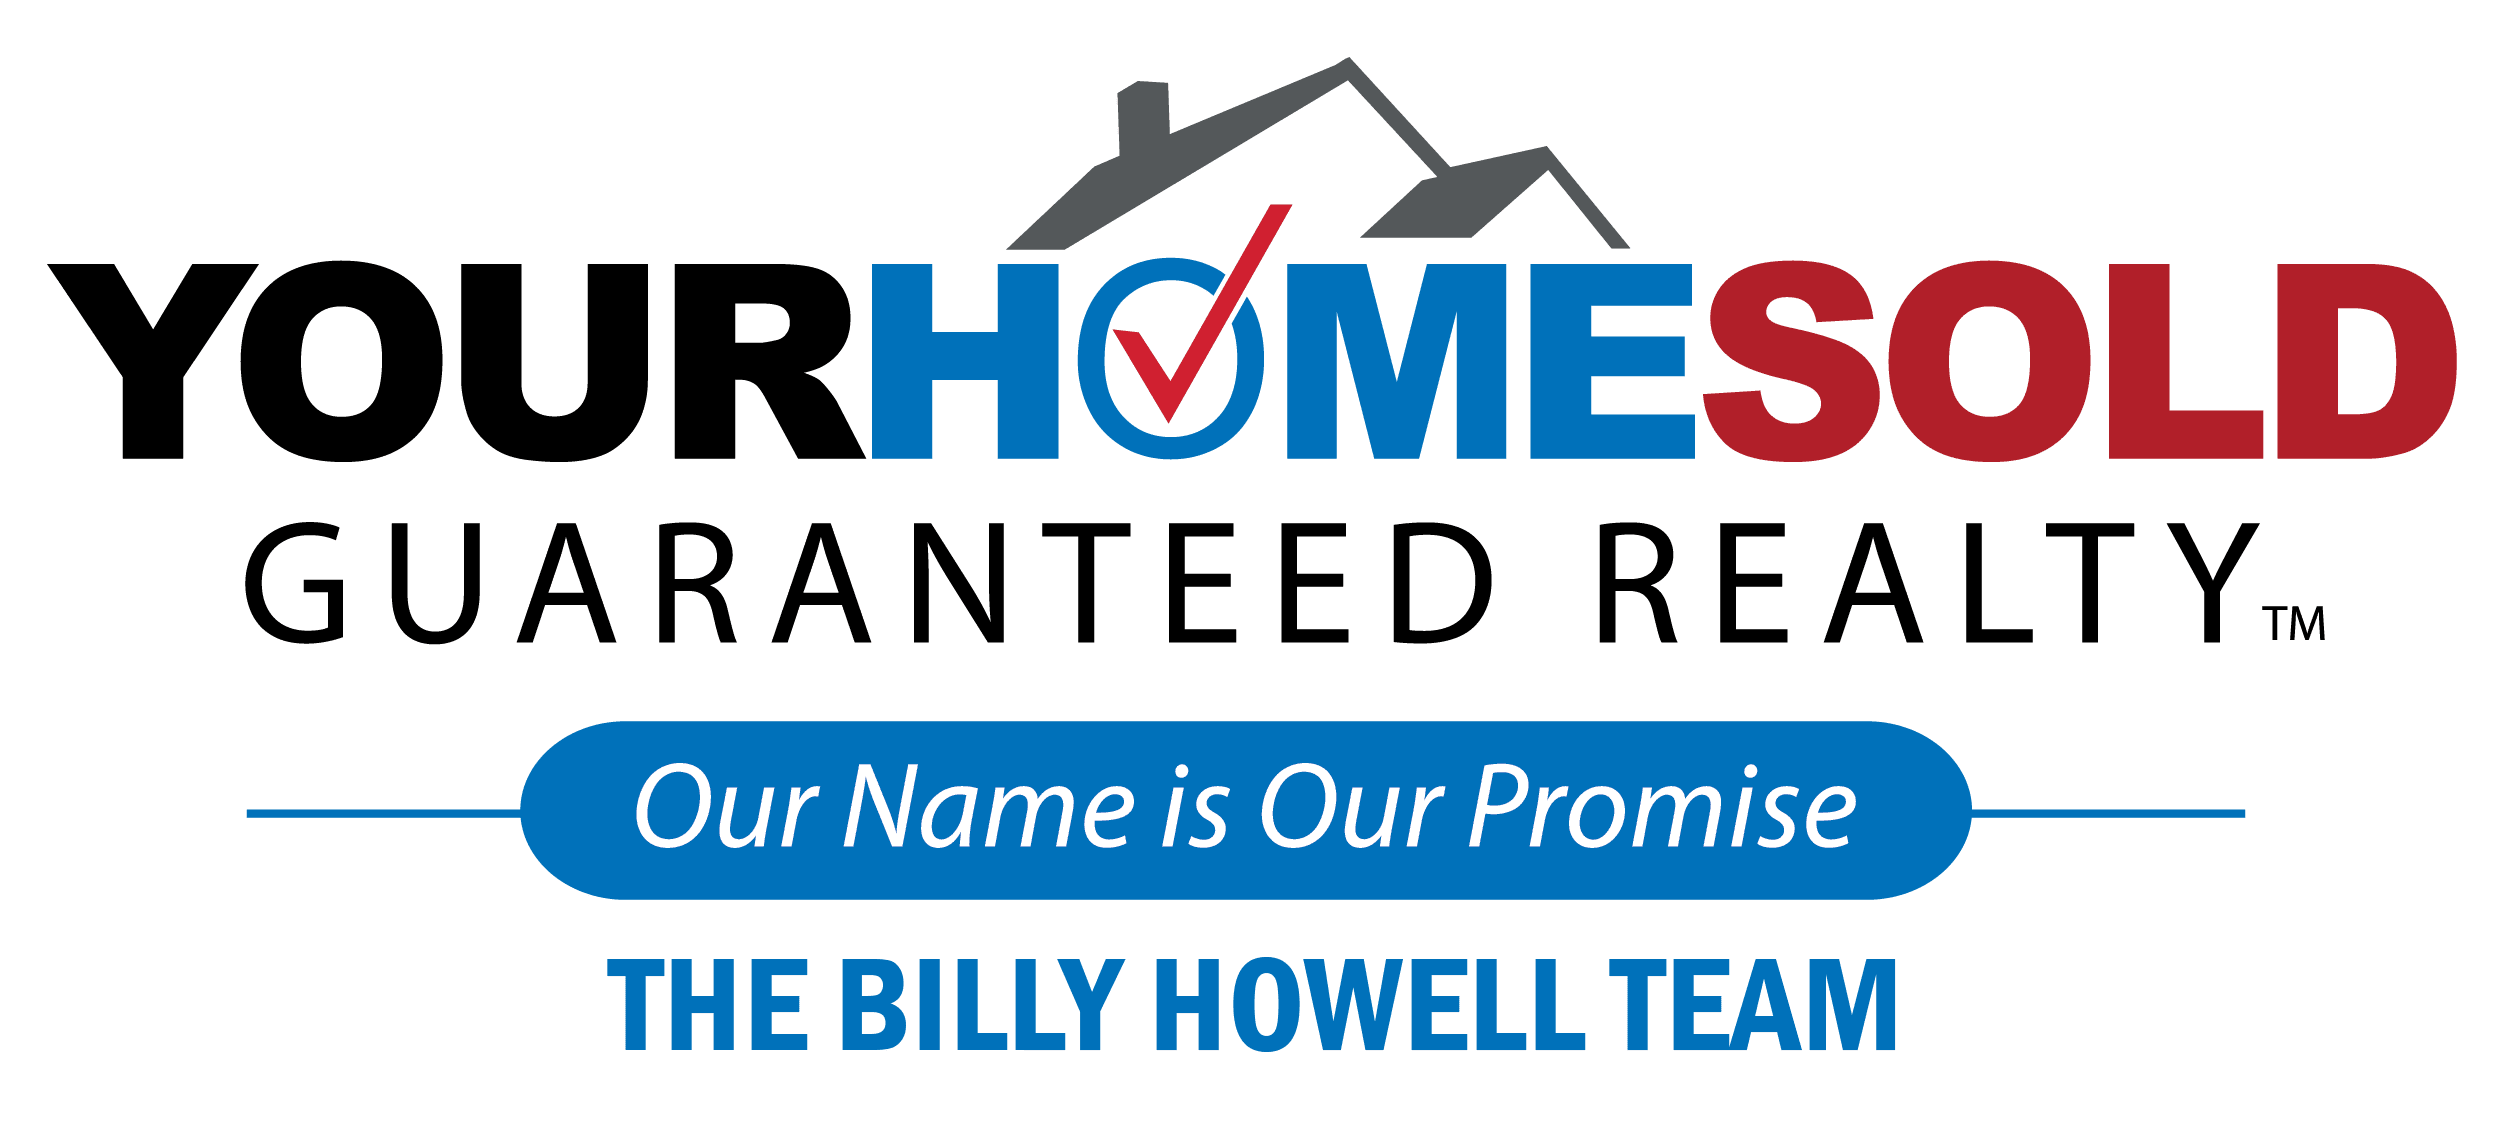 Billy Howell Team Your Home Sold Guaranteed Realty